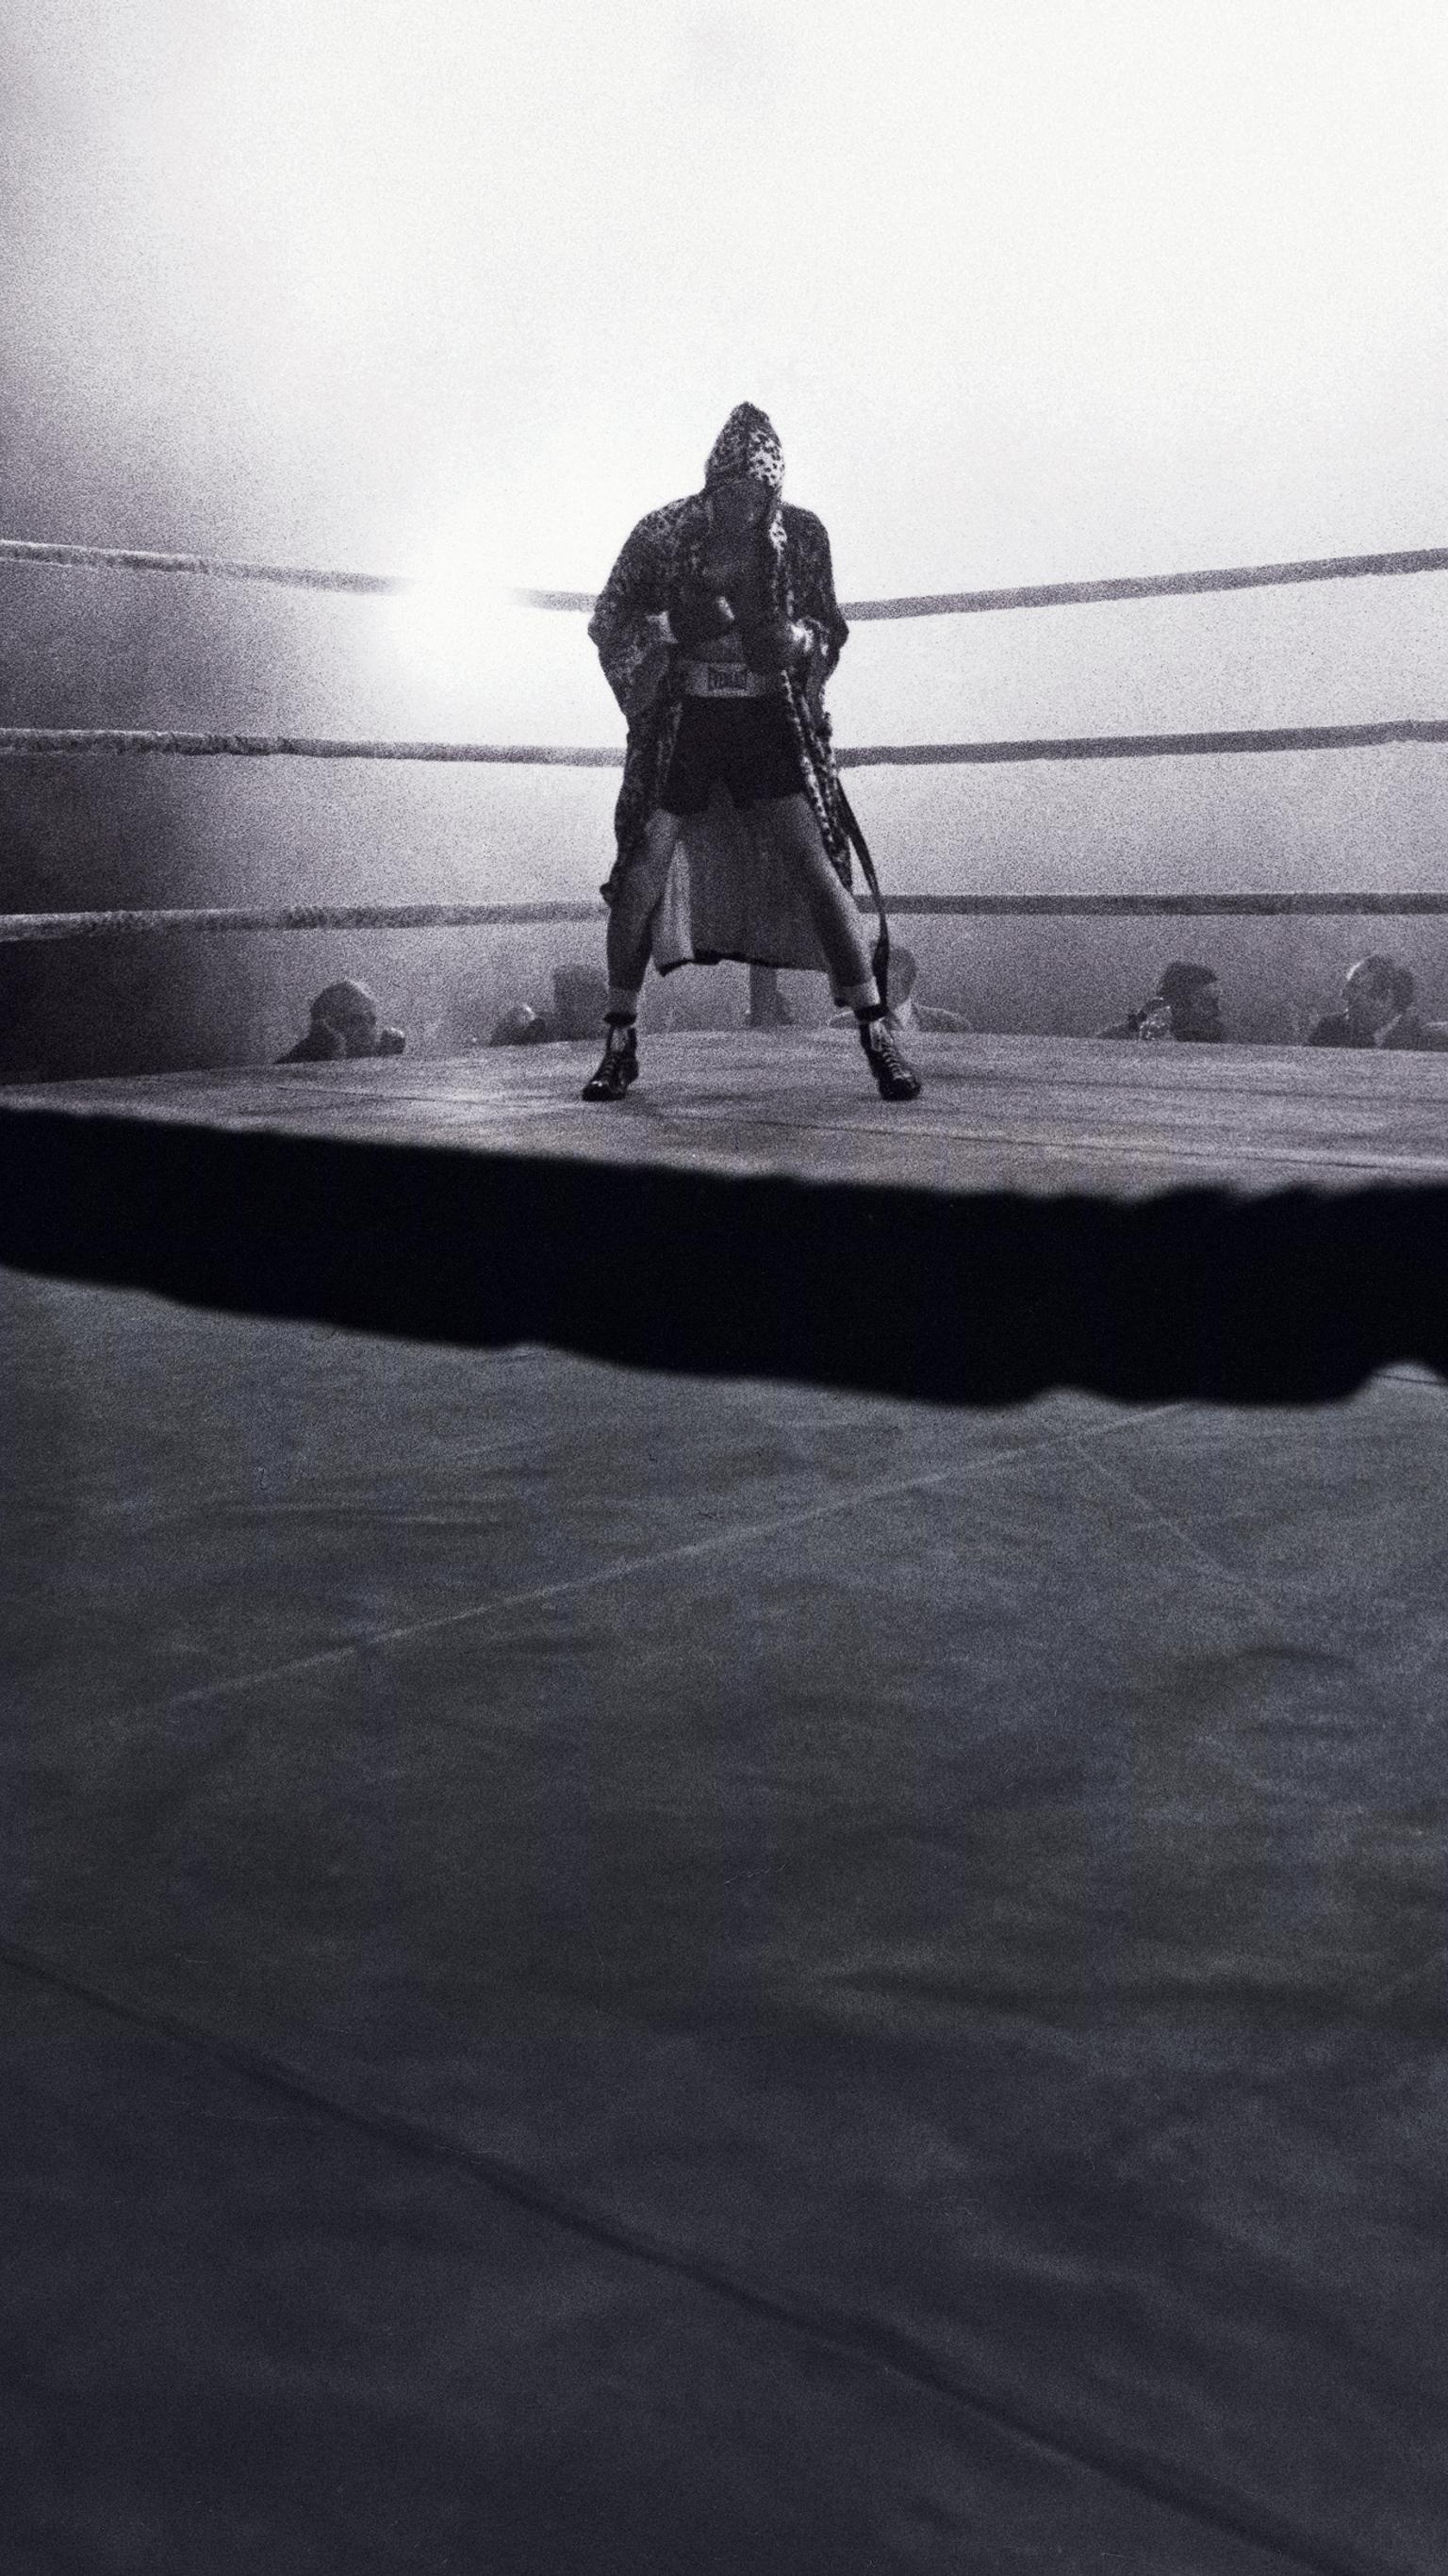 Raging Bull: A 1980 American biographical sports drama film directed by Martin Scorsese. 1540x2740 HD Wallpaper.